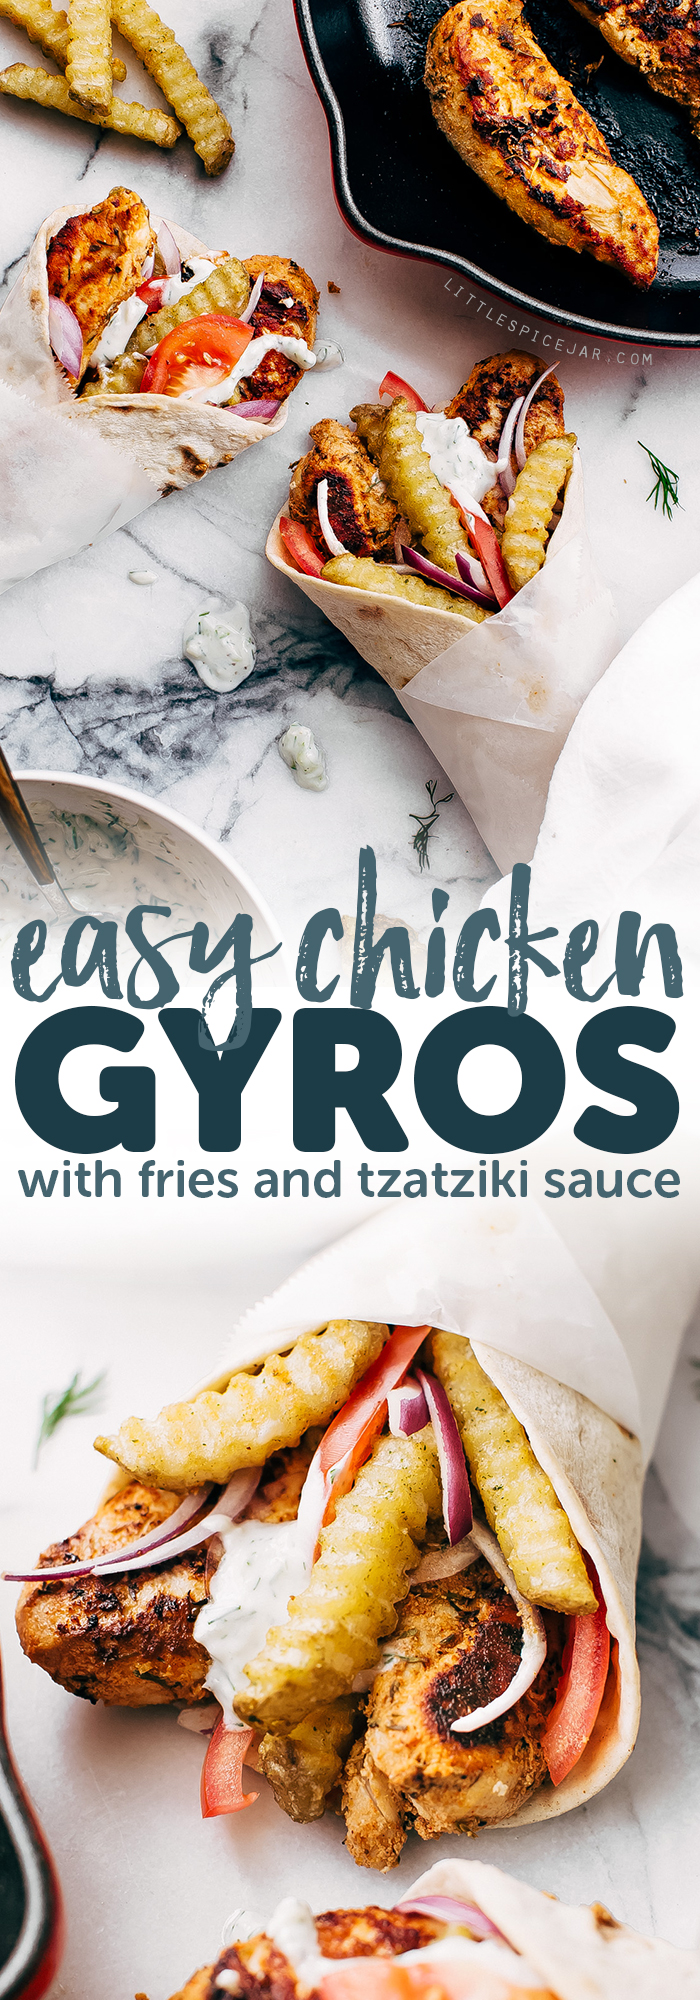 Easy Chicken Gyros with French Fries and Tzatziki Sauce - Learn how to make the easiest chicken gyros! Perfect for weeknight dinners! #chickengyros #gyros #gyrosrecipe #greekchicken | Littlespicejar.com